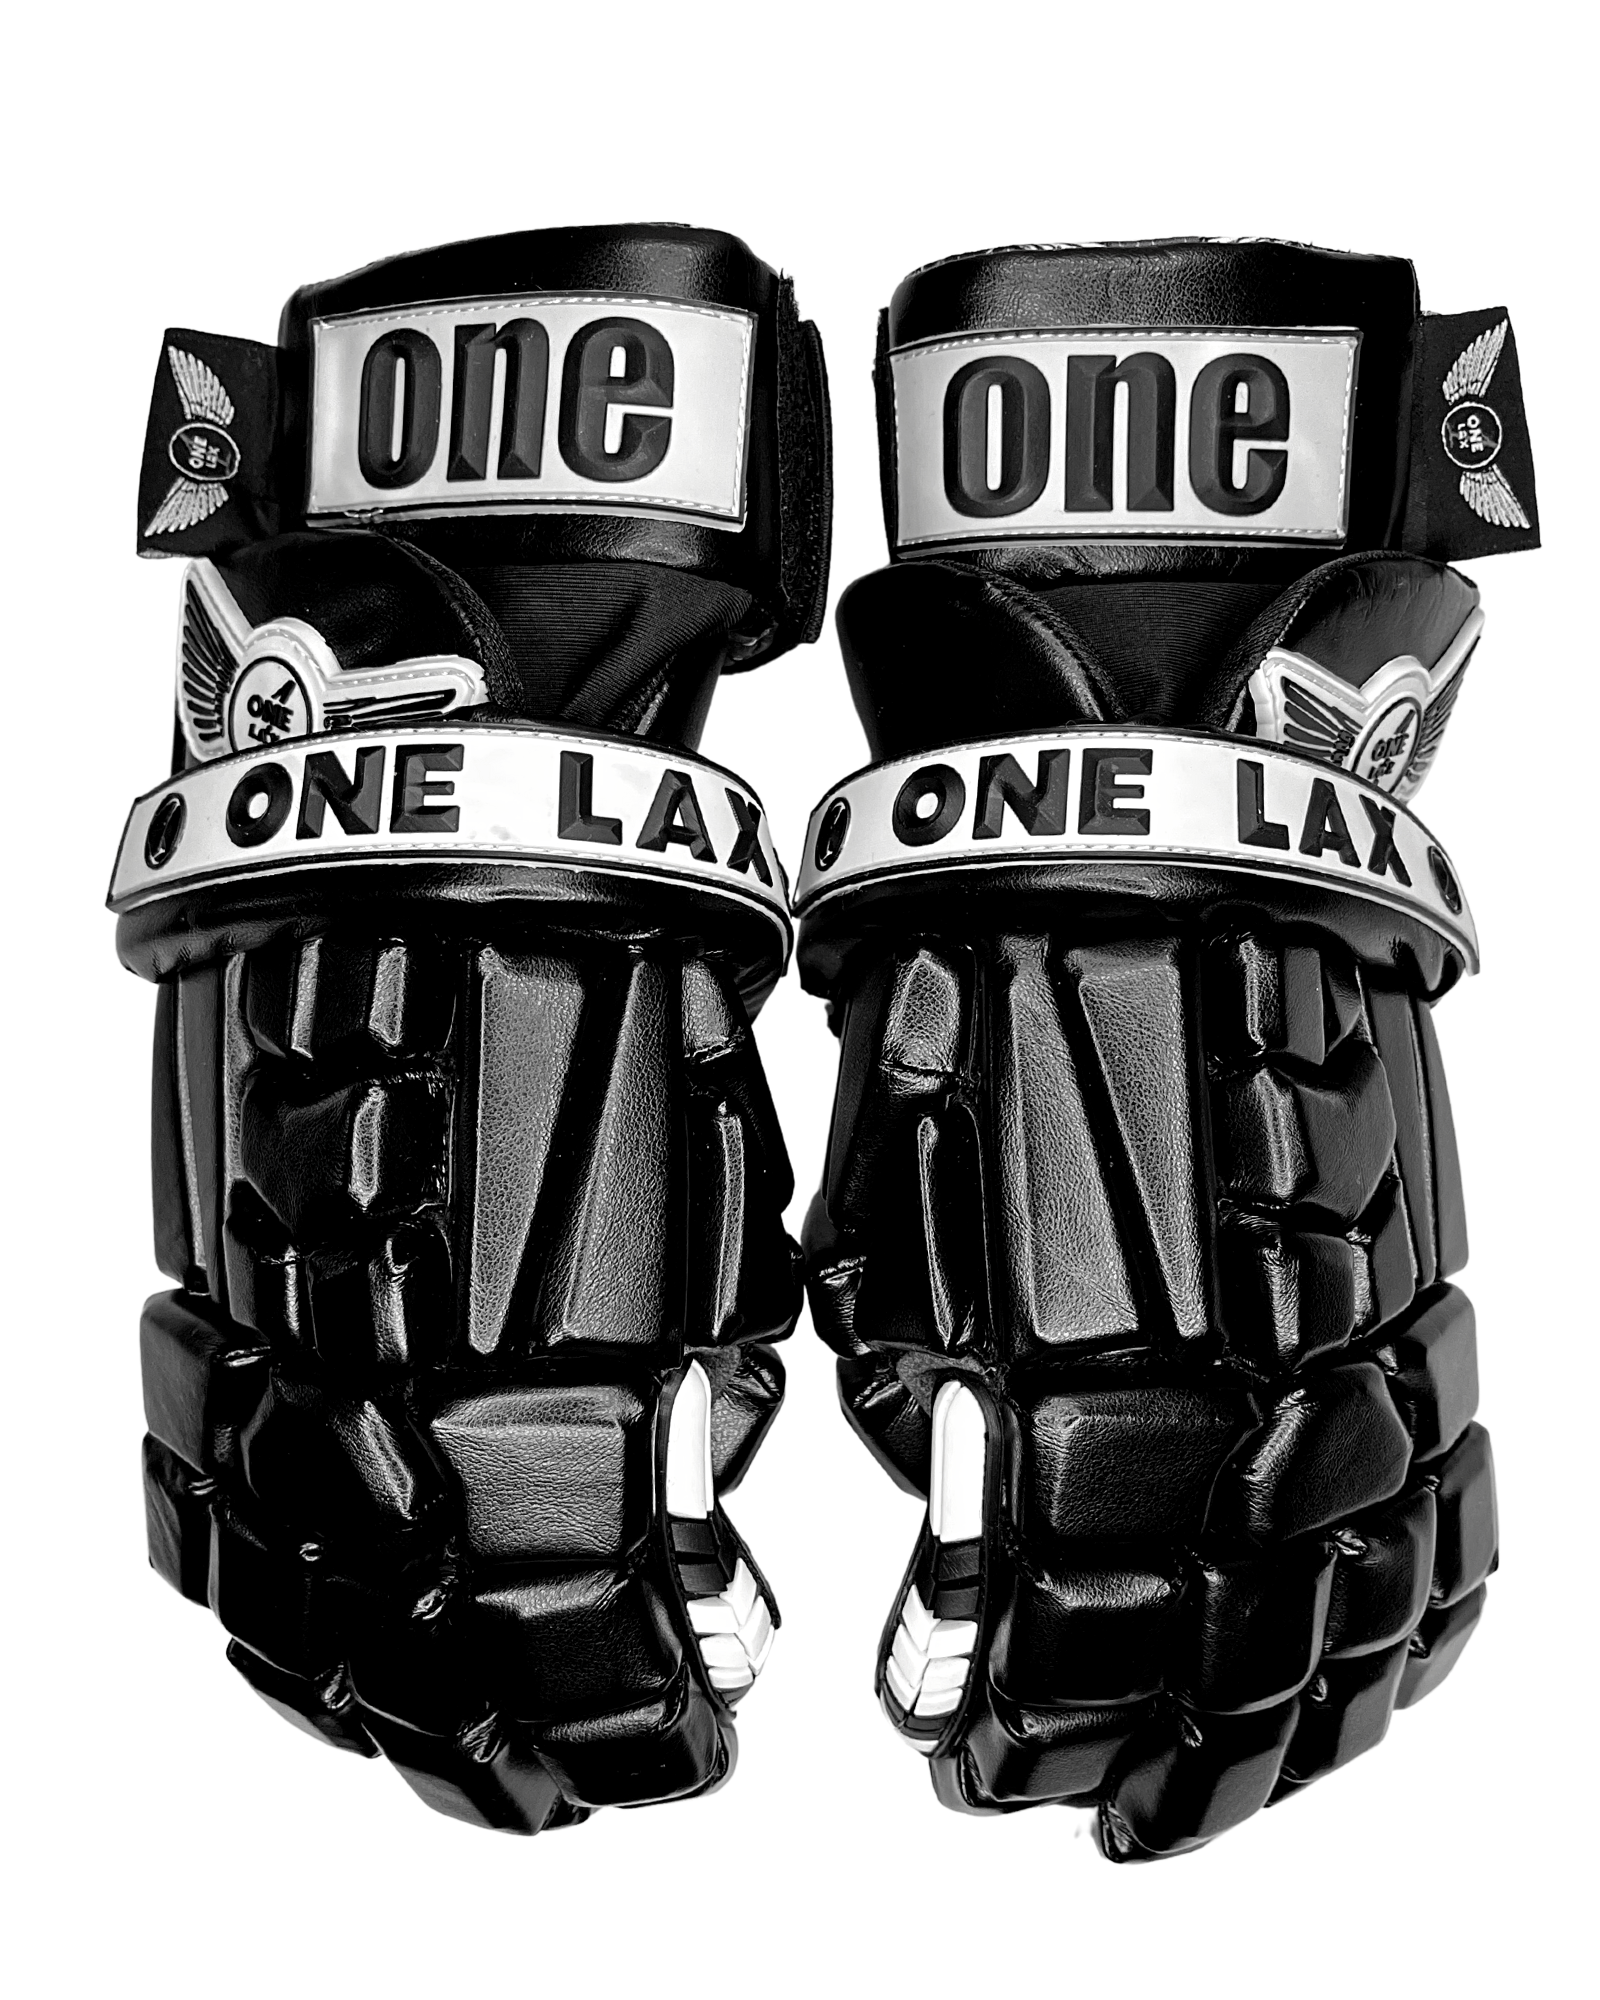 JR. 1 Gloves in Black | 2 Kids Sizes Available | HYBRID Box & Field Lacrosse Gloves - One Lax